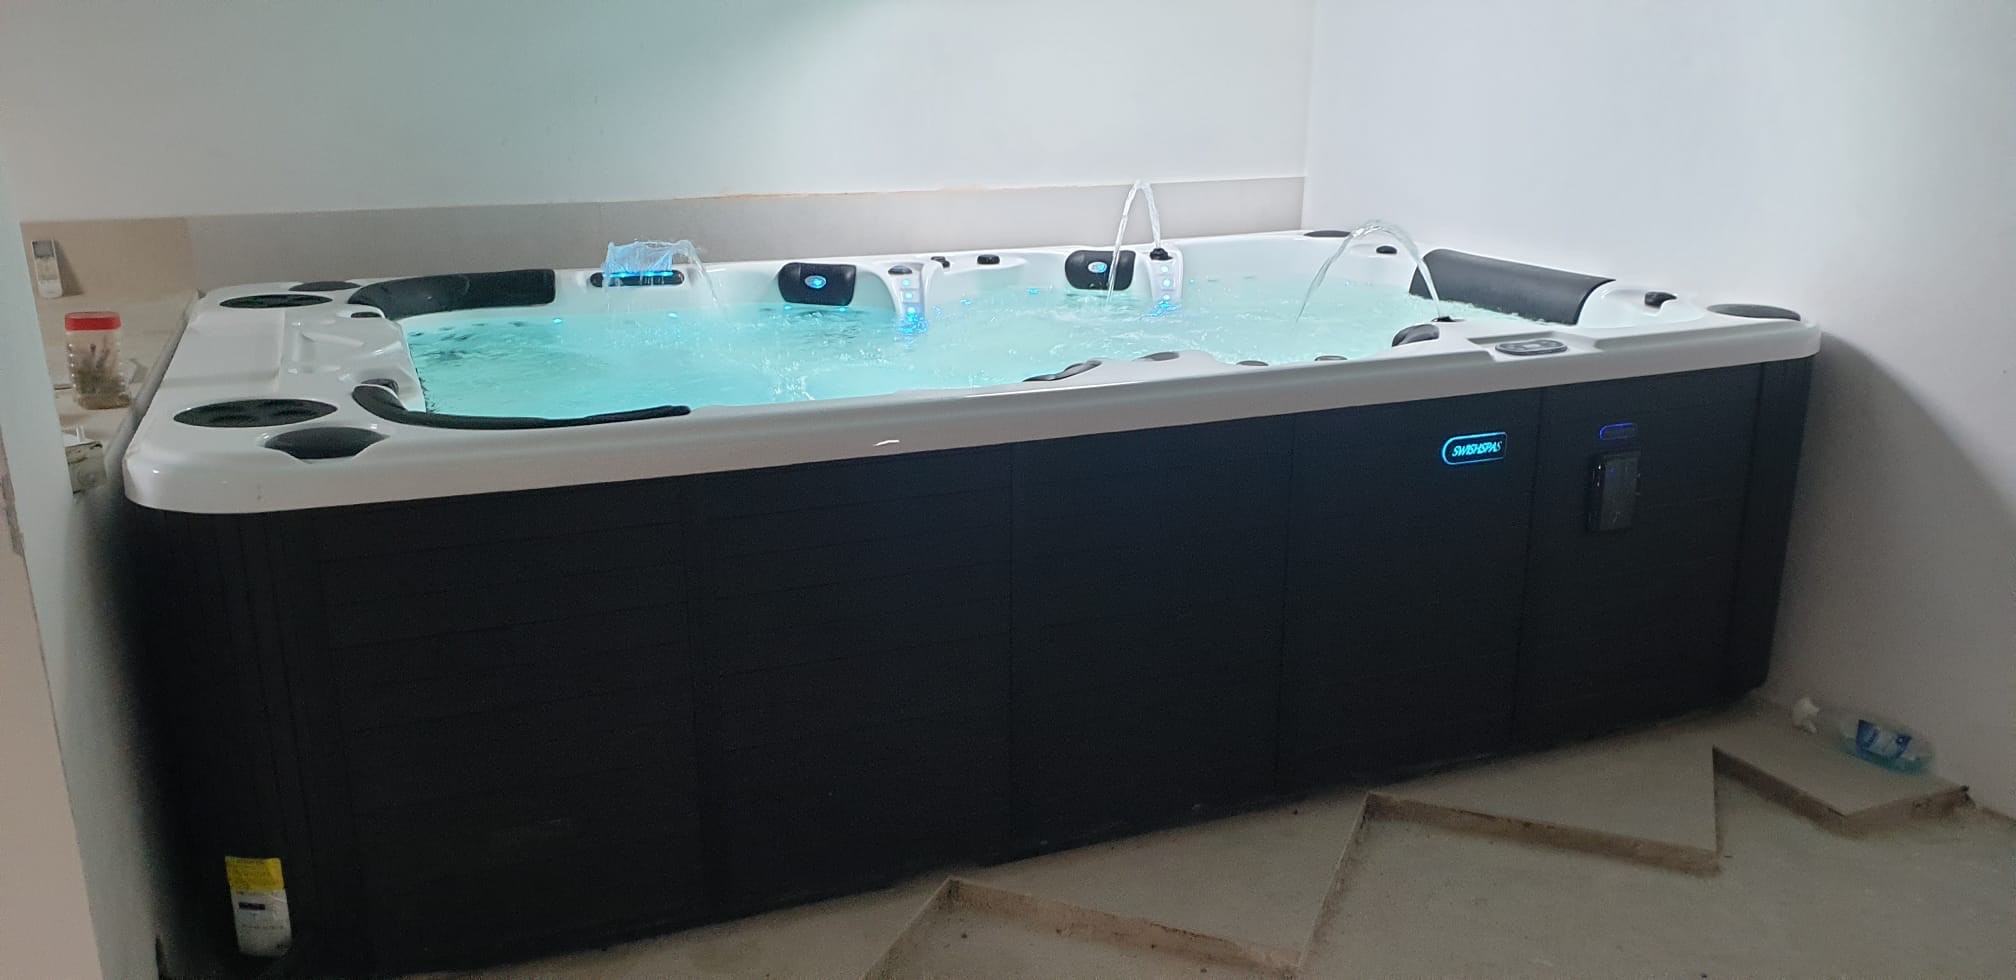 This beautiful Emperor spa was delivered and installed to a happy family in Marbella. 
 Interested?
 We have over 40 spa... » Outdoor Furniture Fuengirola, Costa Del Sol, Spain